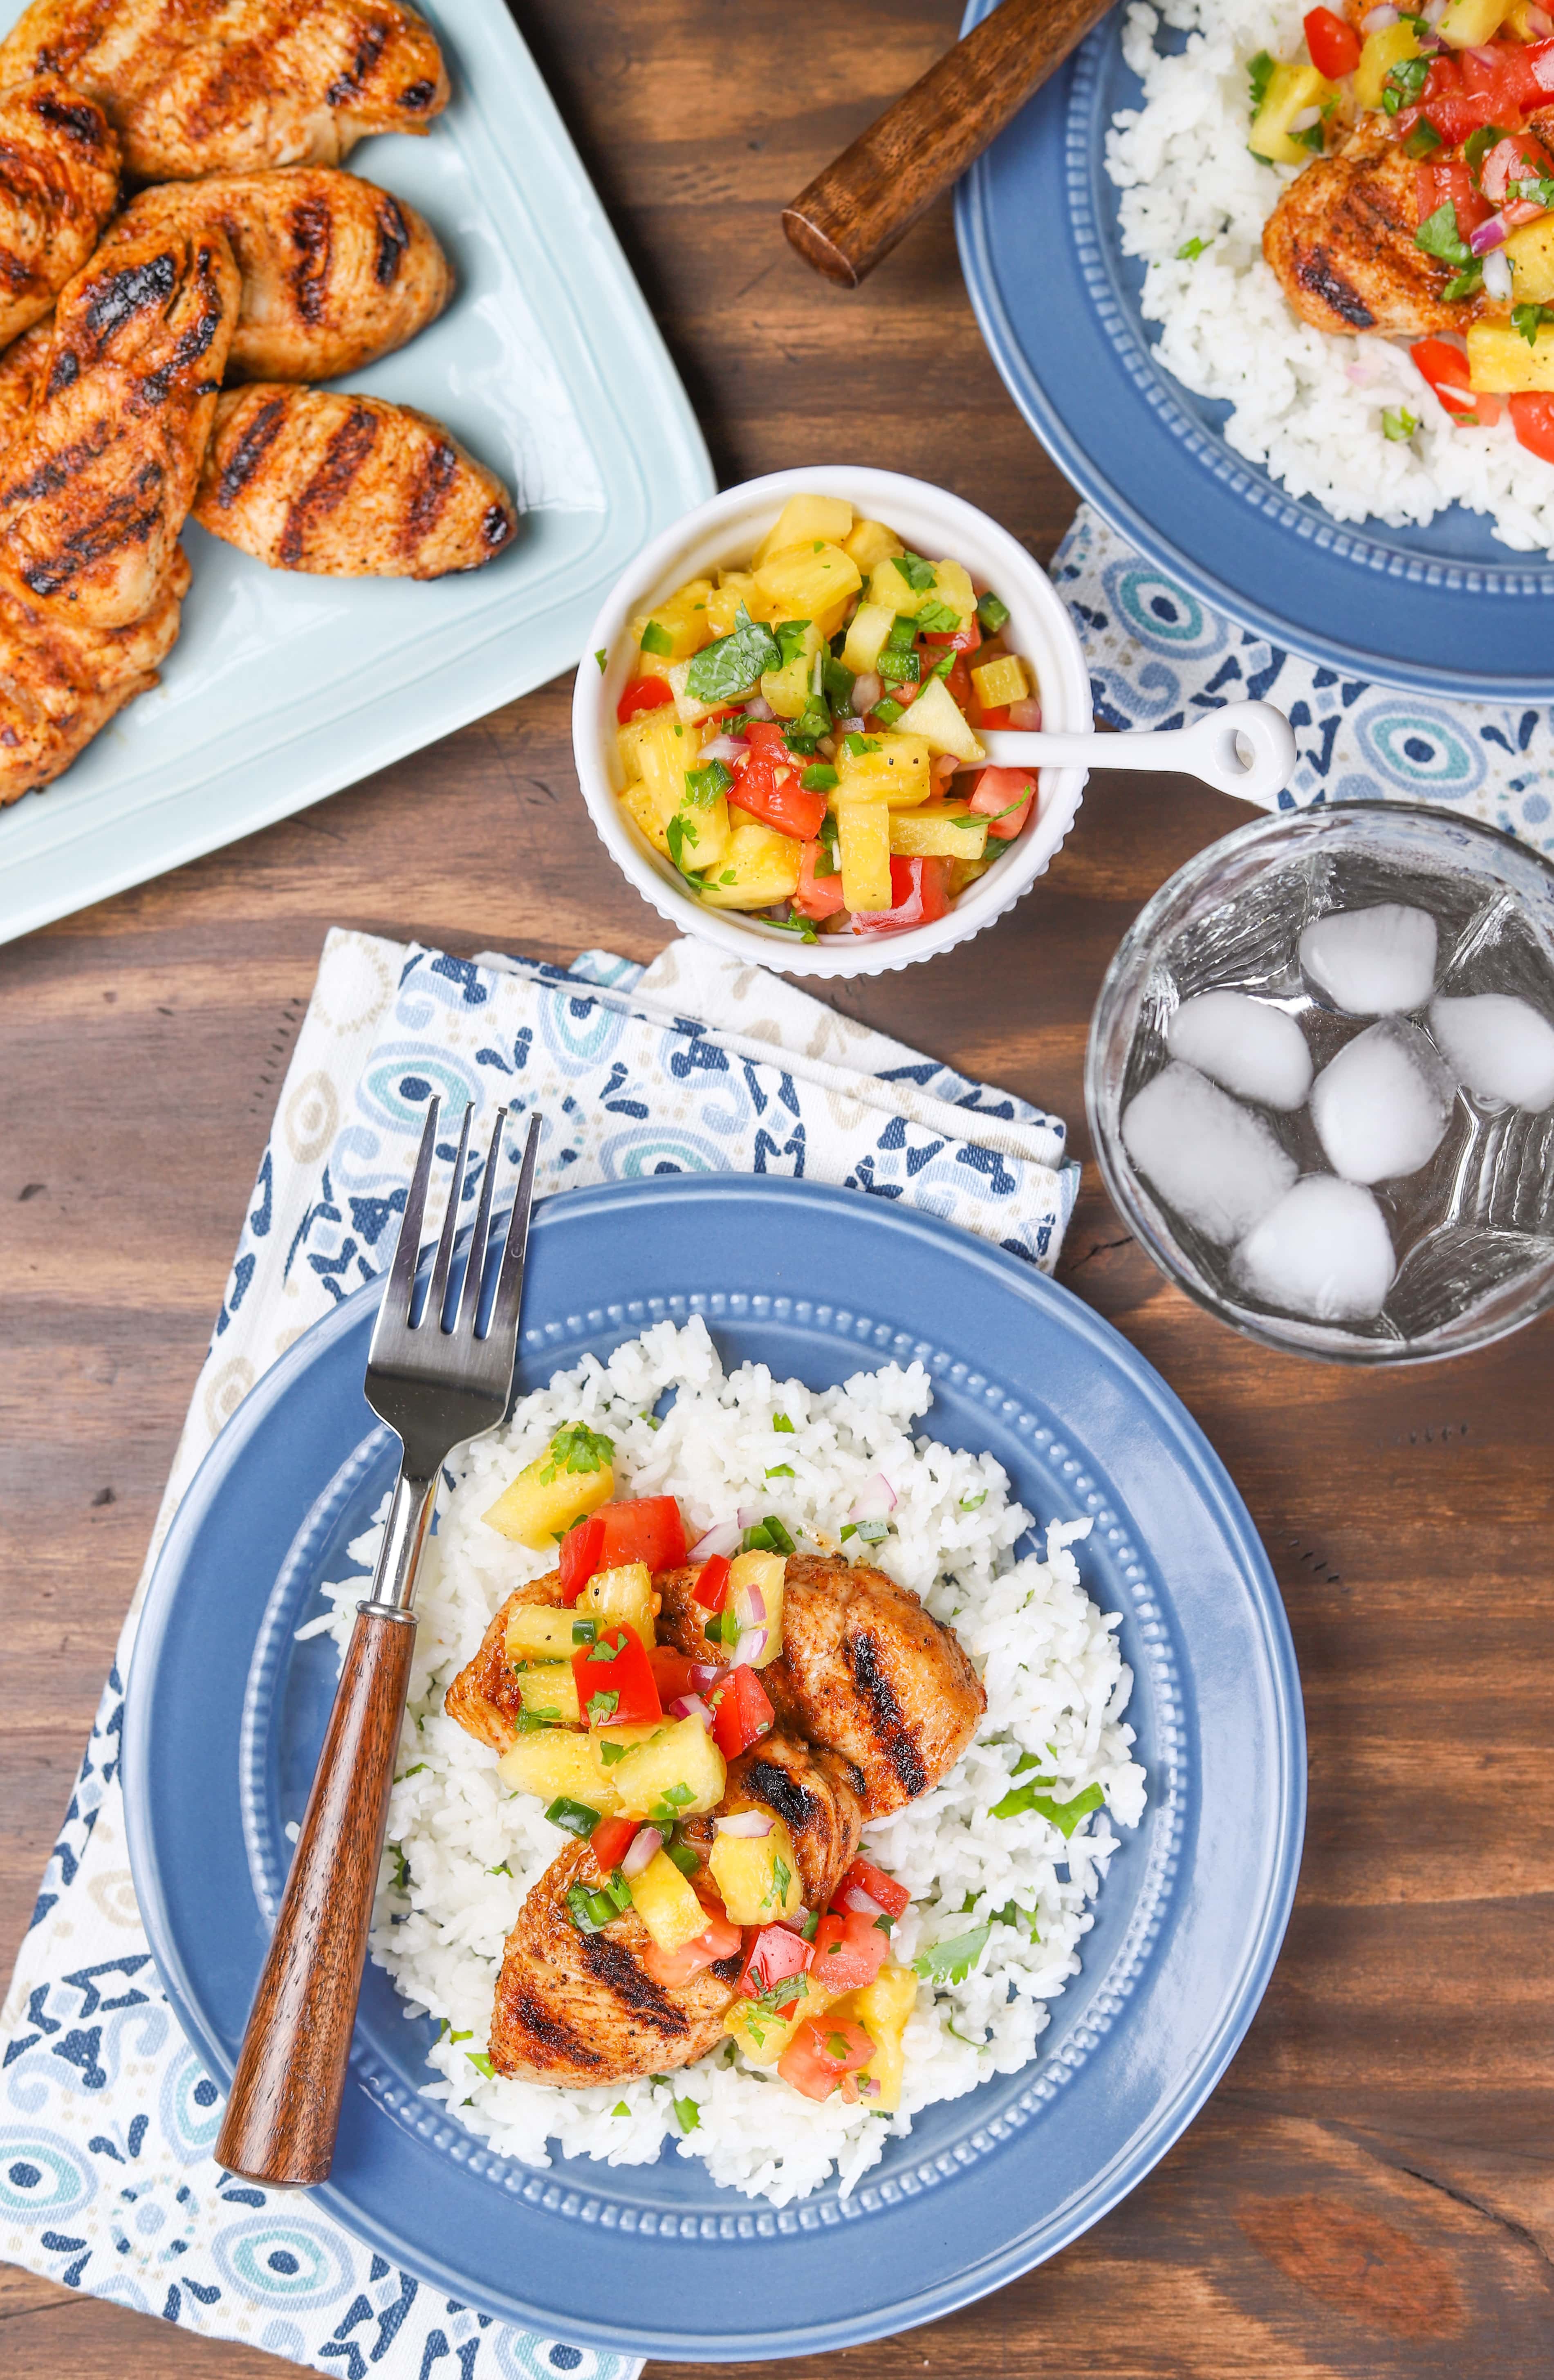 Grilled Chili Lime Turkey Tenders with Pineapple Salsa Recipe